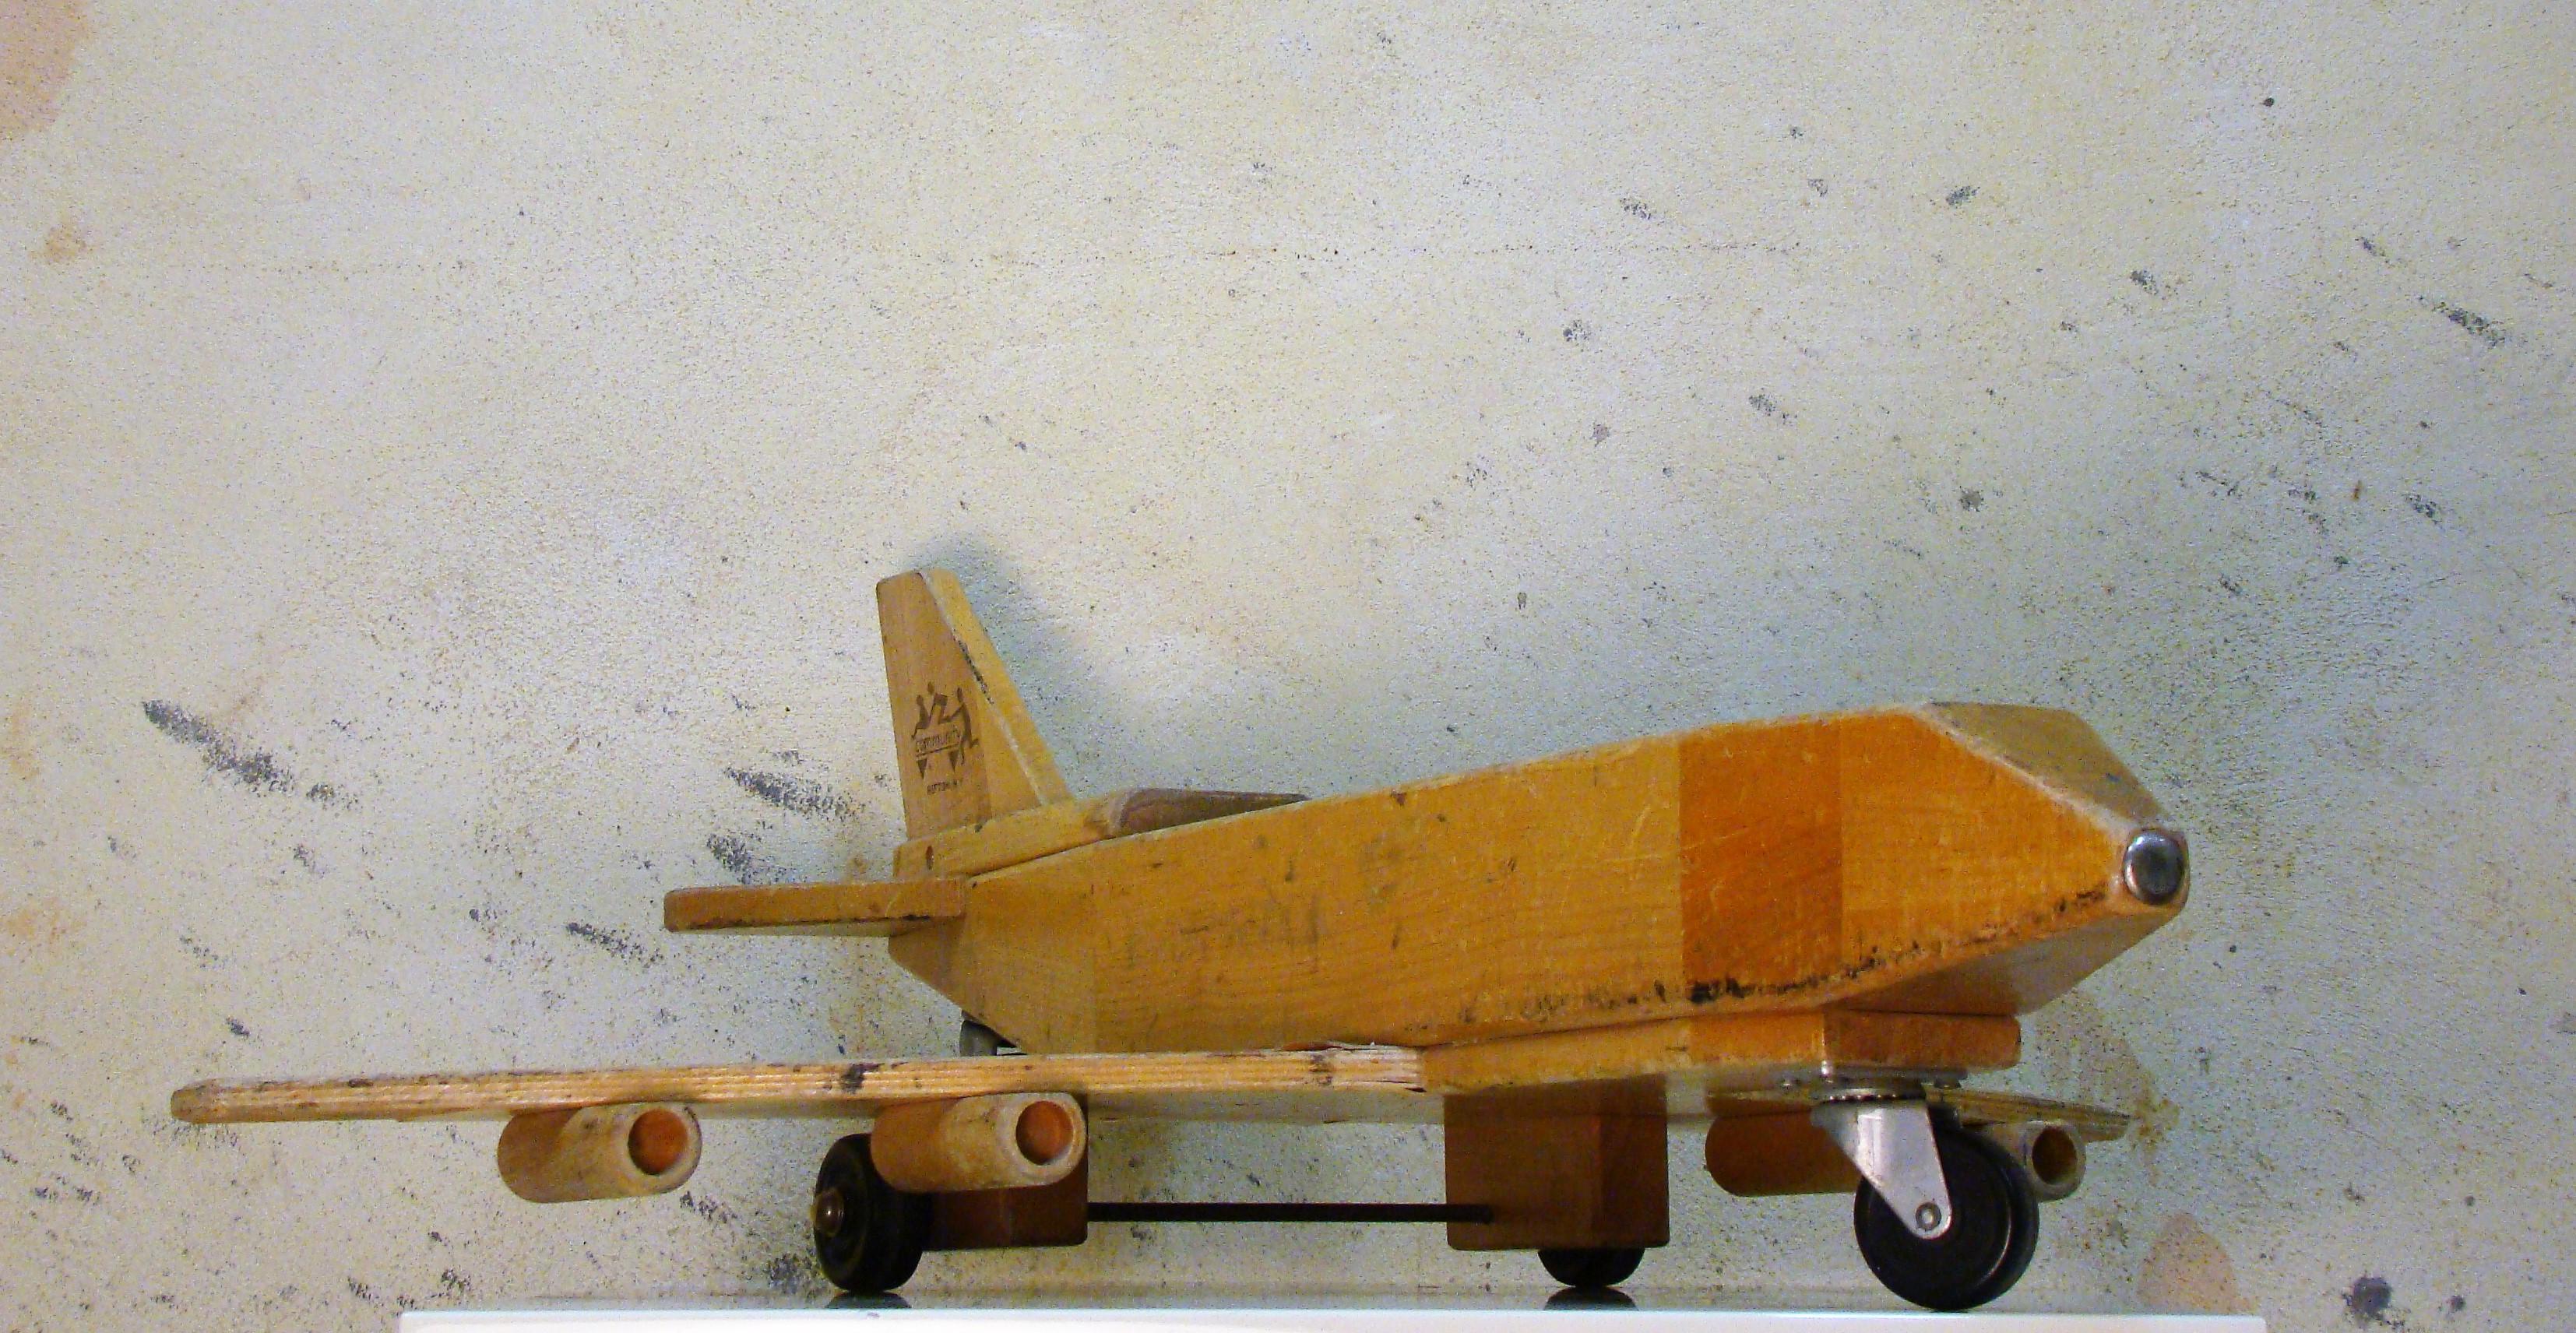 Community Playthings Wooden Toy Cargo Airplane, circa 1968, USA For Sale 4